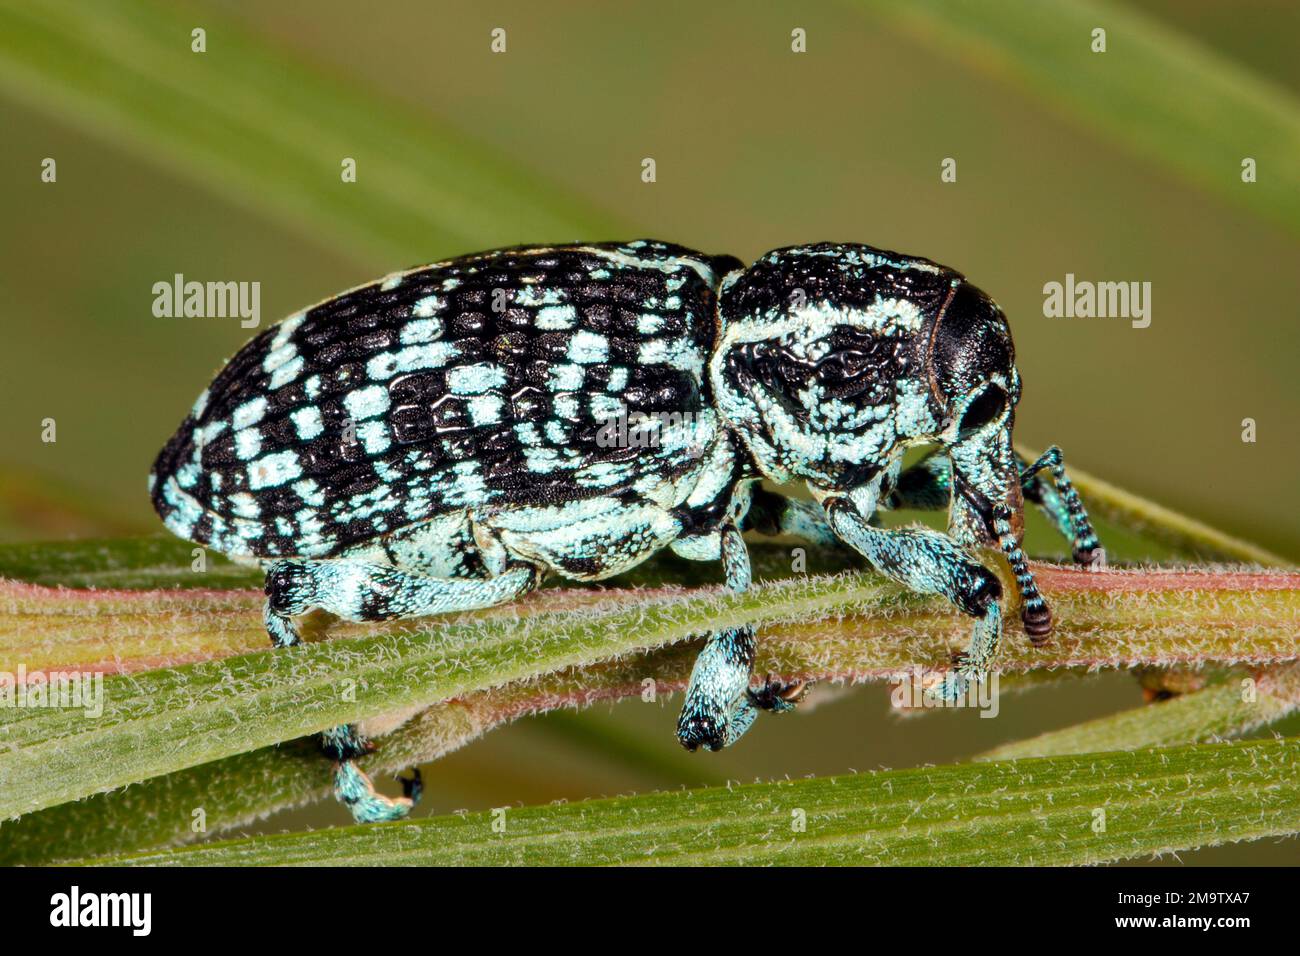 Botany Bay Weevil, Chrysolopus spectabilis. Conosciuto anche come Botany Bay Diamond Beetle, Botany Bay Diamond Weevil e Sapphire Weevil. Coffs Harbour, New South Wales Foto Stock